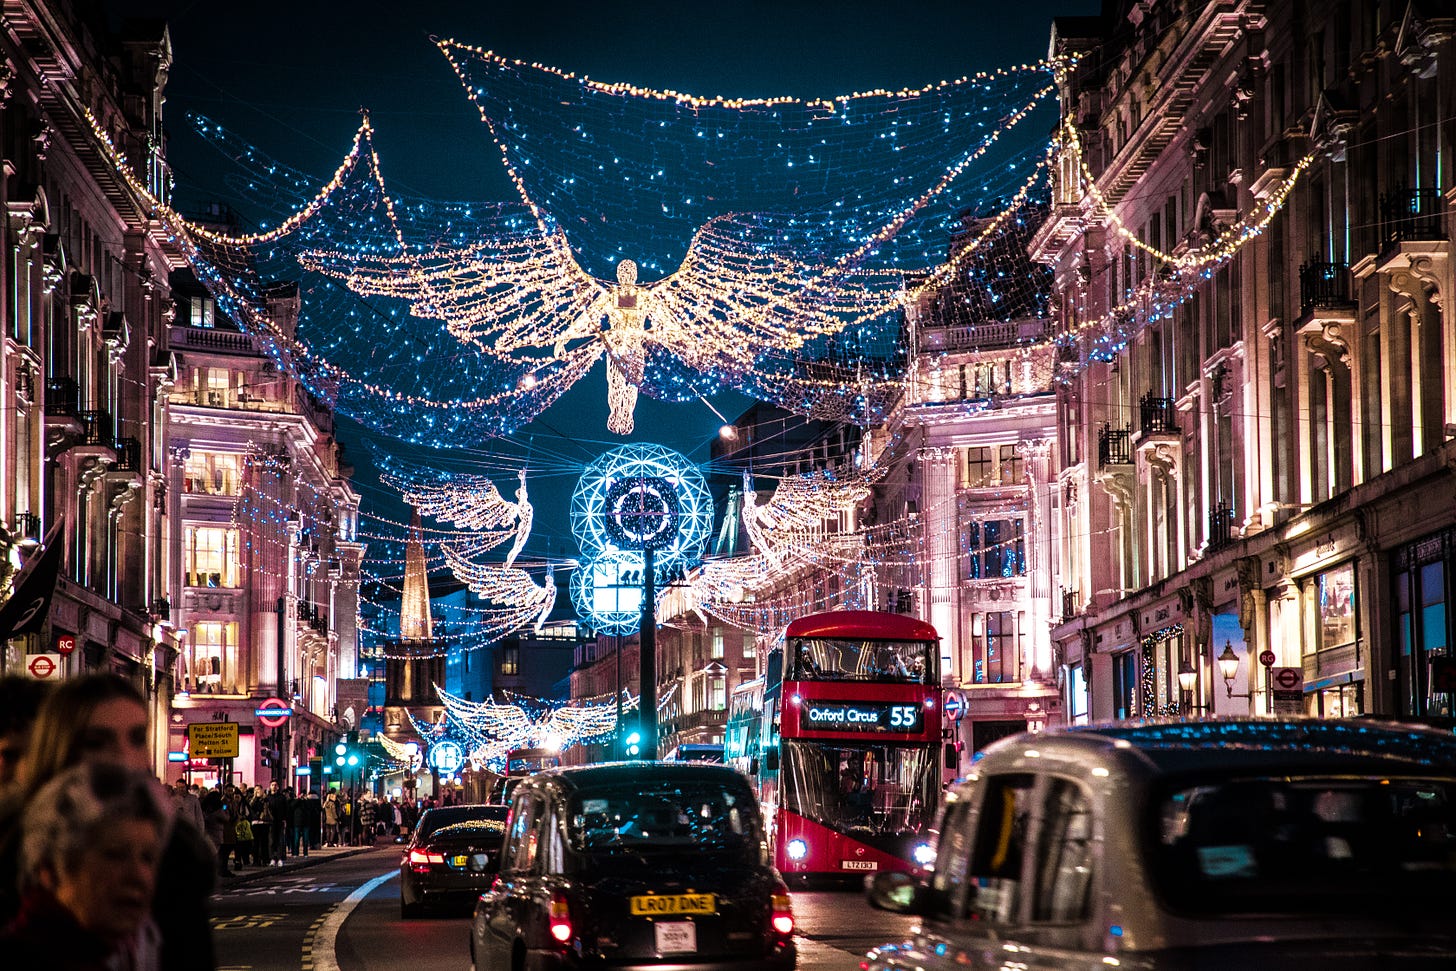 Blue and white lights over Oxford Street, an angel decorated above the street, double decker bus and other traffic below